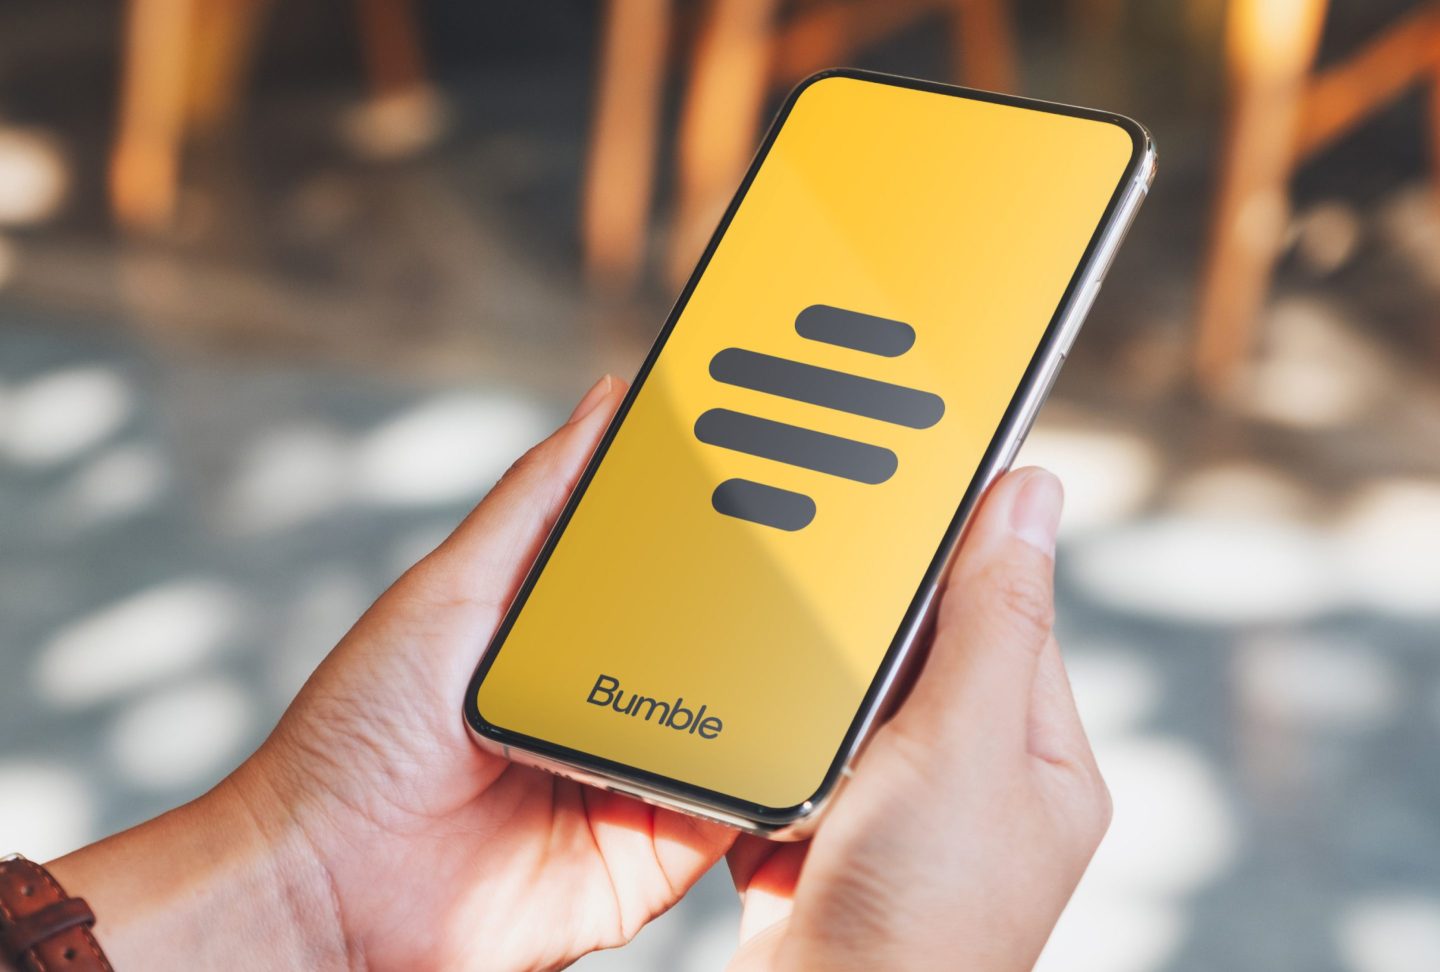 Bumble is making big changes to its app.